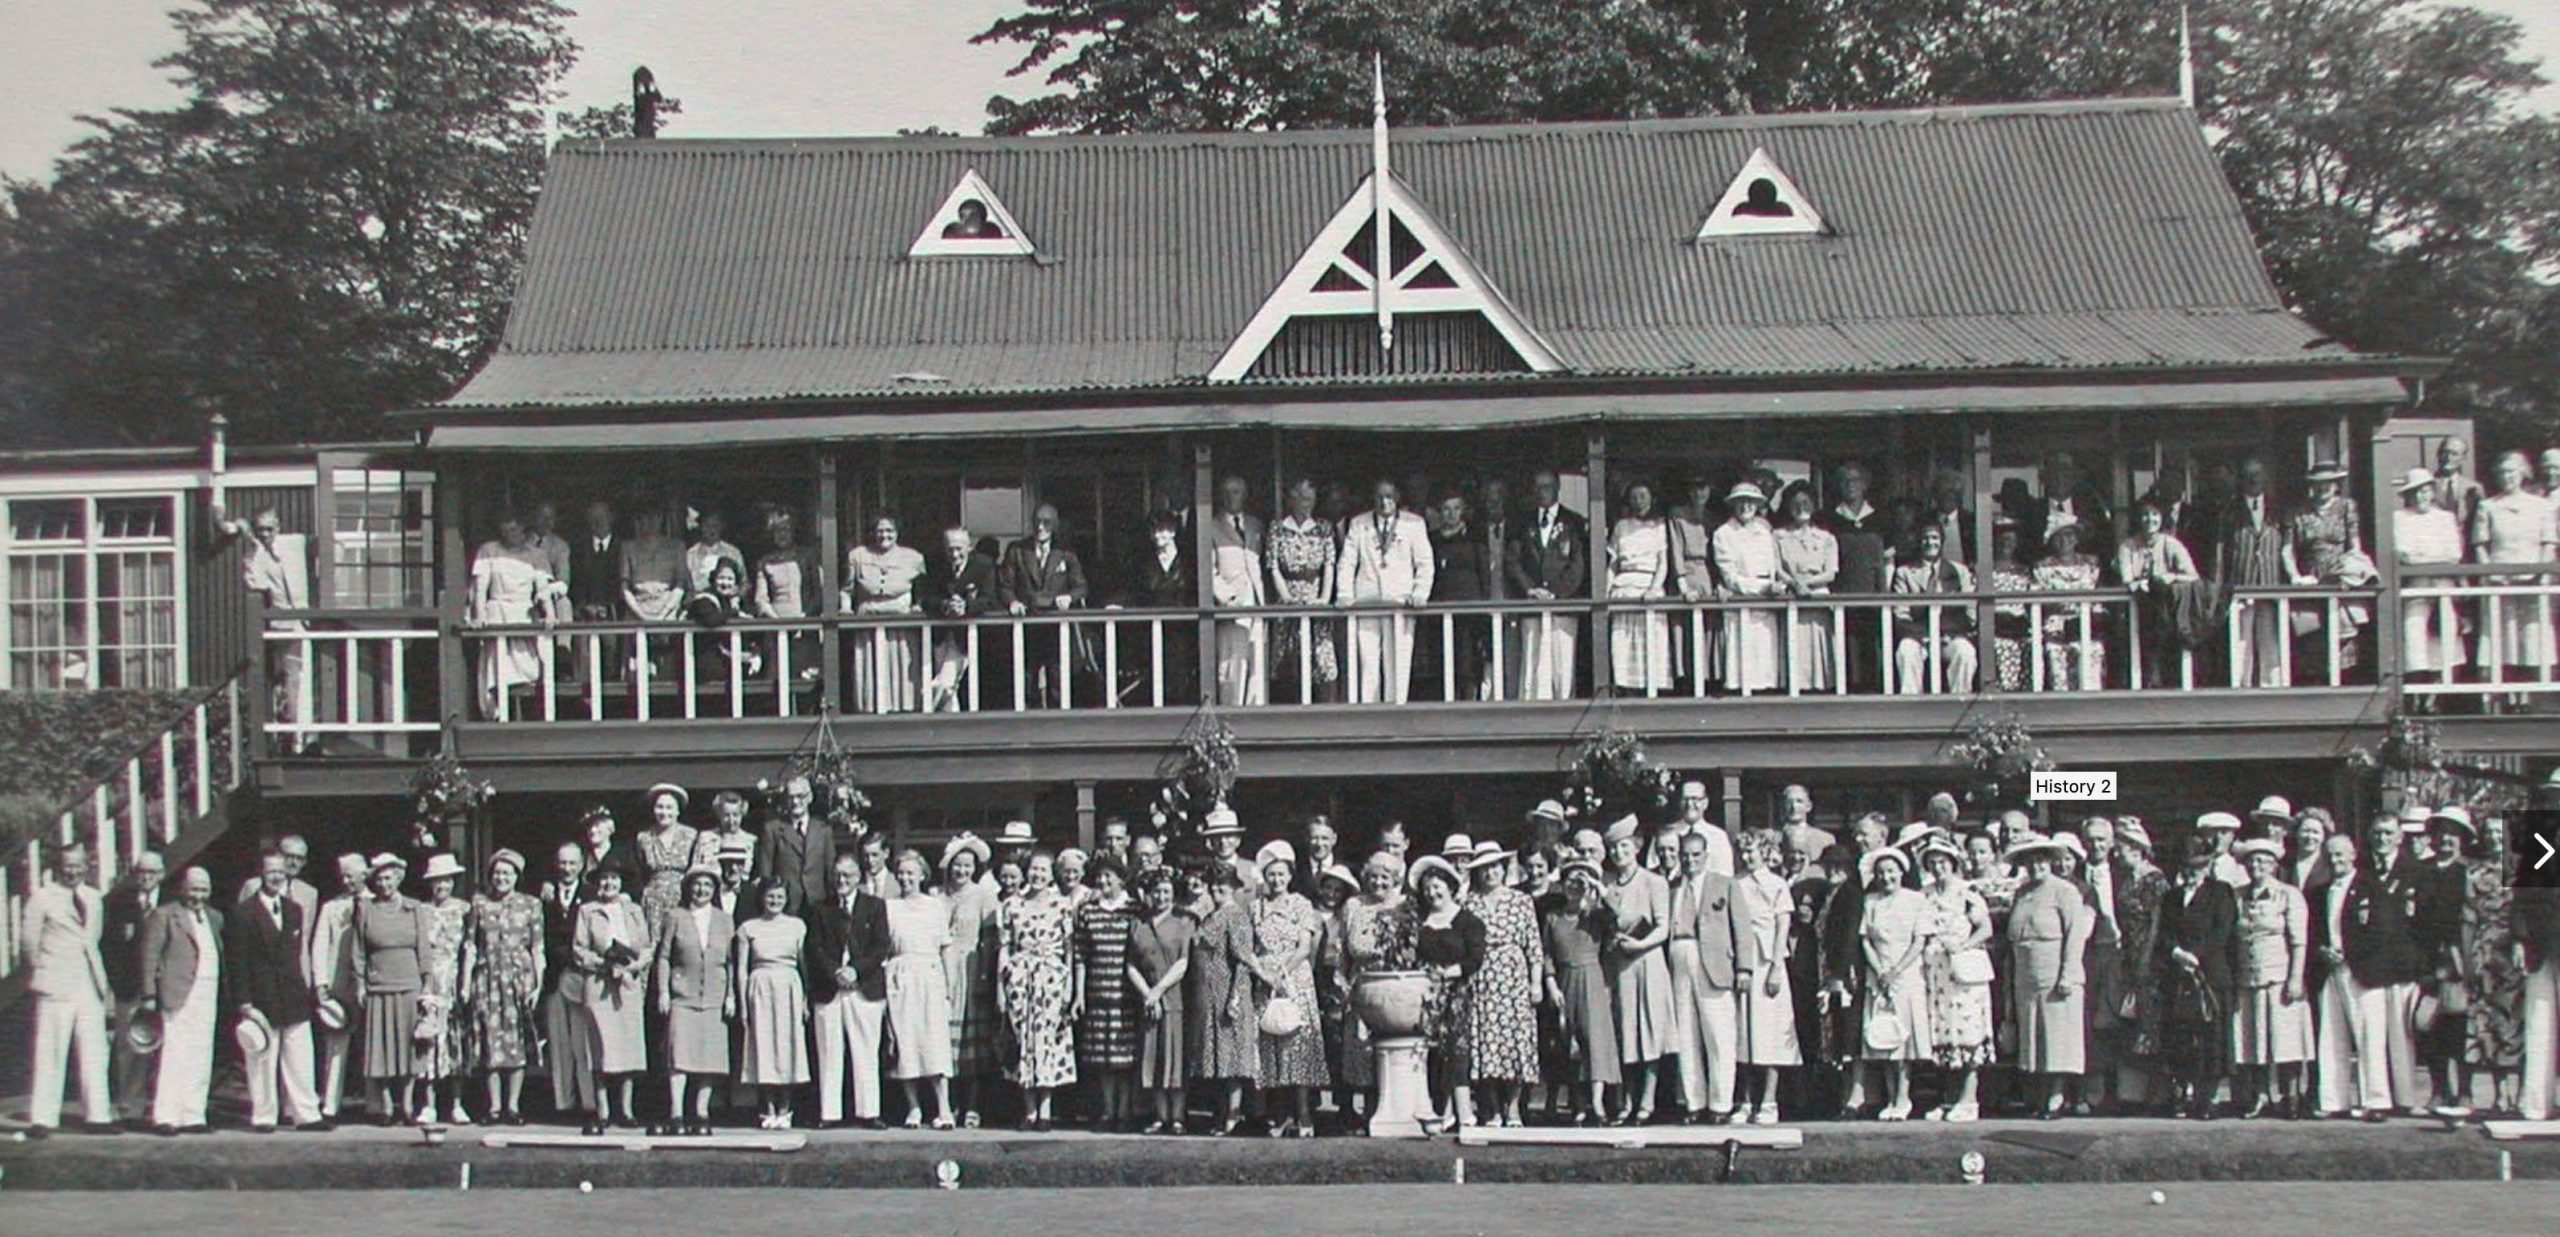 The Leicester Bowling Club was formed in 1906 and the centenary was recorded with the publication of our history handbook. Extracts and photographs from the Handbook are shown below with kind permission of authors and researchers P Thake, J McVicar, D Morgan The Club was founded in 1906 and a pavilion was built in 1907 on land on Victoria Road, now known as University Road, and leased to the Club by the Corporation. In the same year the green was laid with Cumberland Turf – the first time this was used locally. The green was officially opened in June 1907. An extension was built to the pavilion in 1924 which consisted of both a Committee Room and Ladies’ Room.